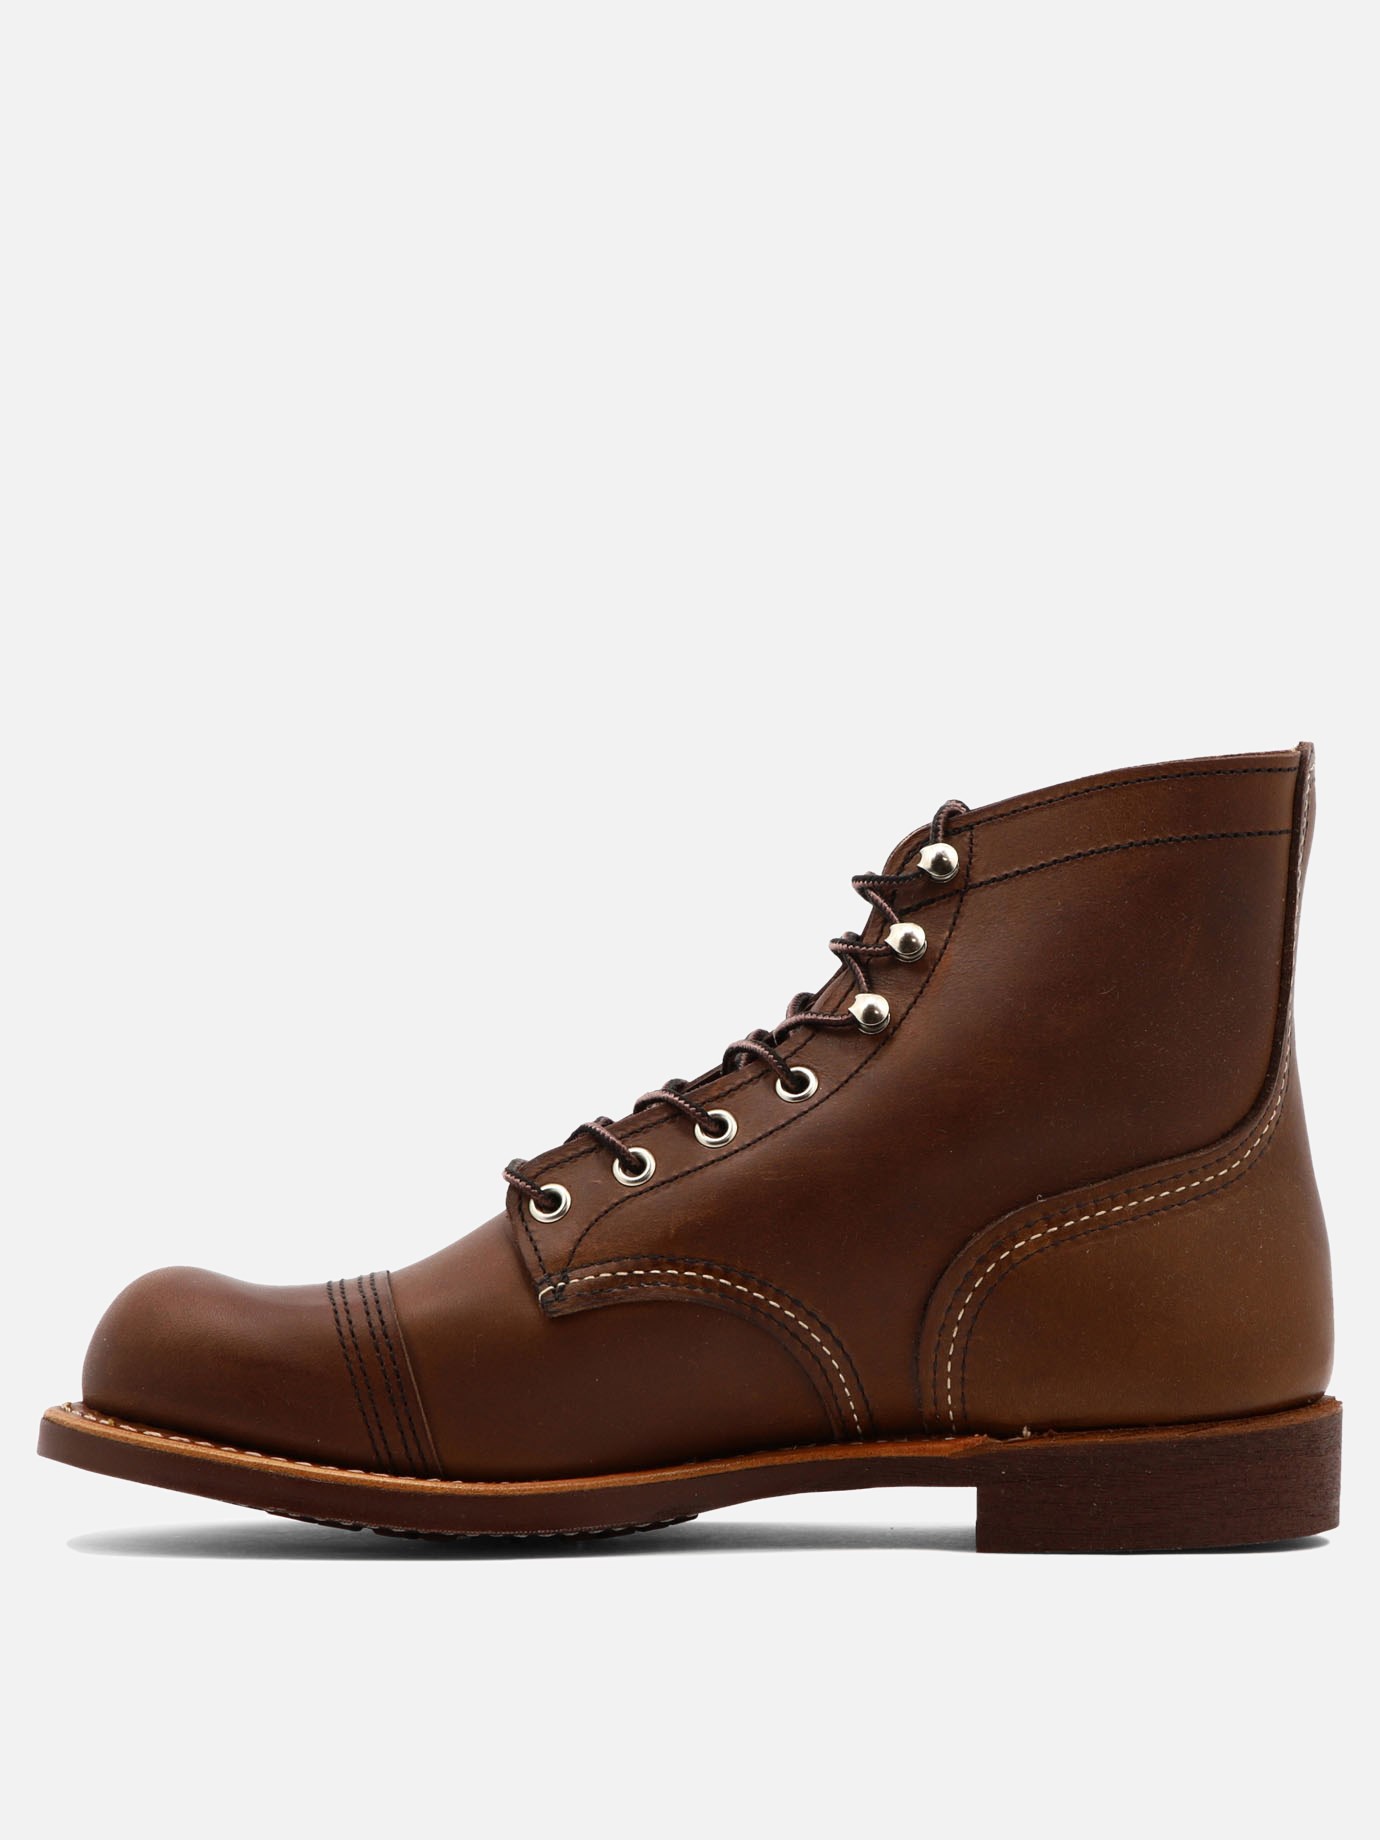  Iron Ranger  ankle boots by Red Wing Shoes